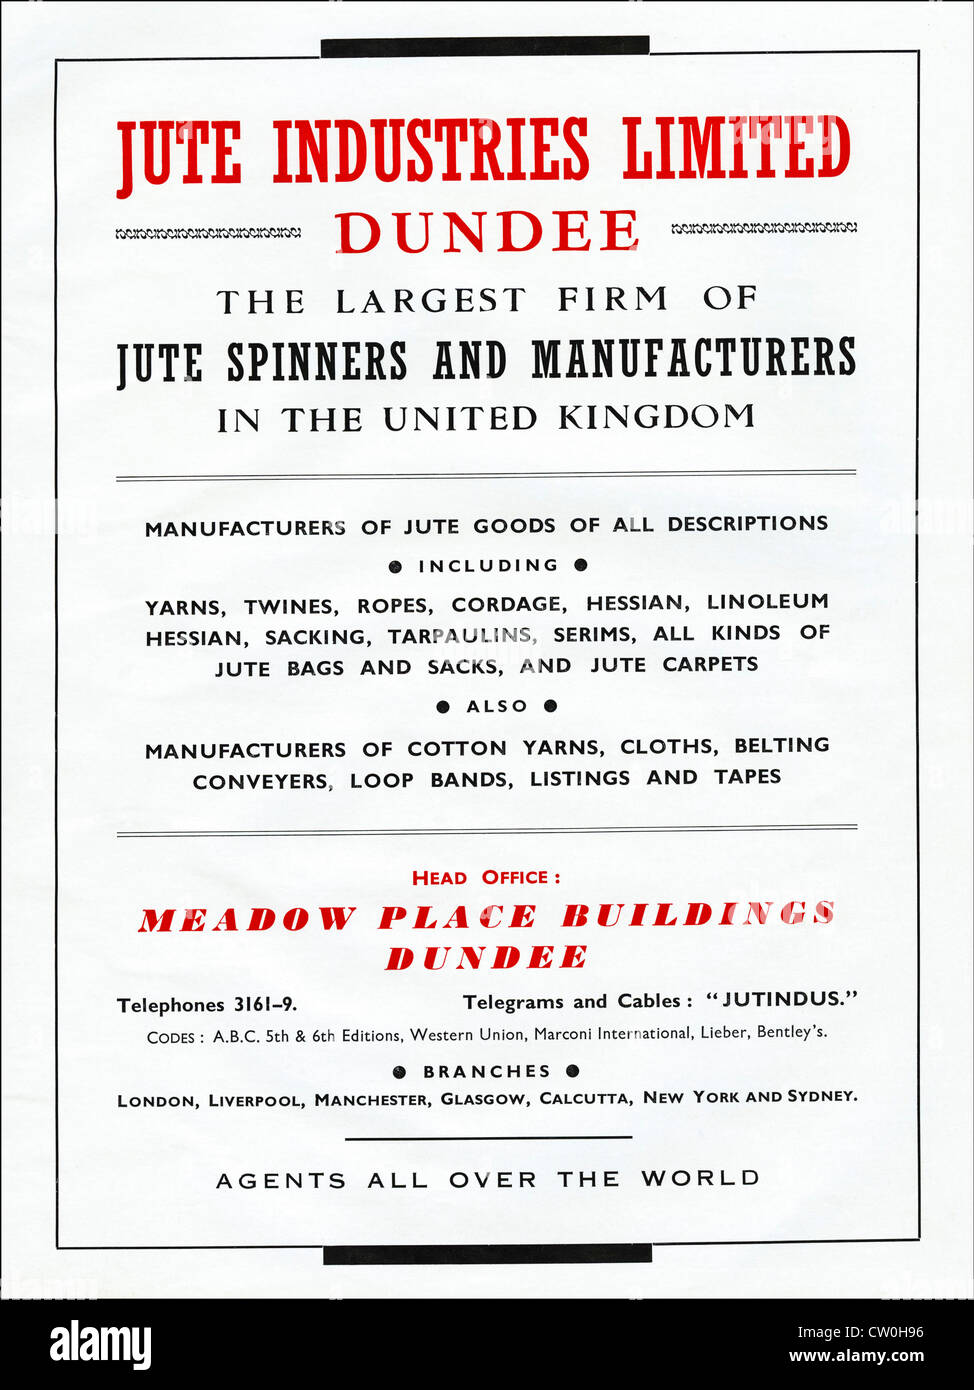 Vintage print advertisement from textile manufacturers yearbook circa 1948 advertising JUTE INDUSTRIES LIMITED of DUNDEE jute sinners and manufacturers Stock Photo